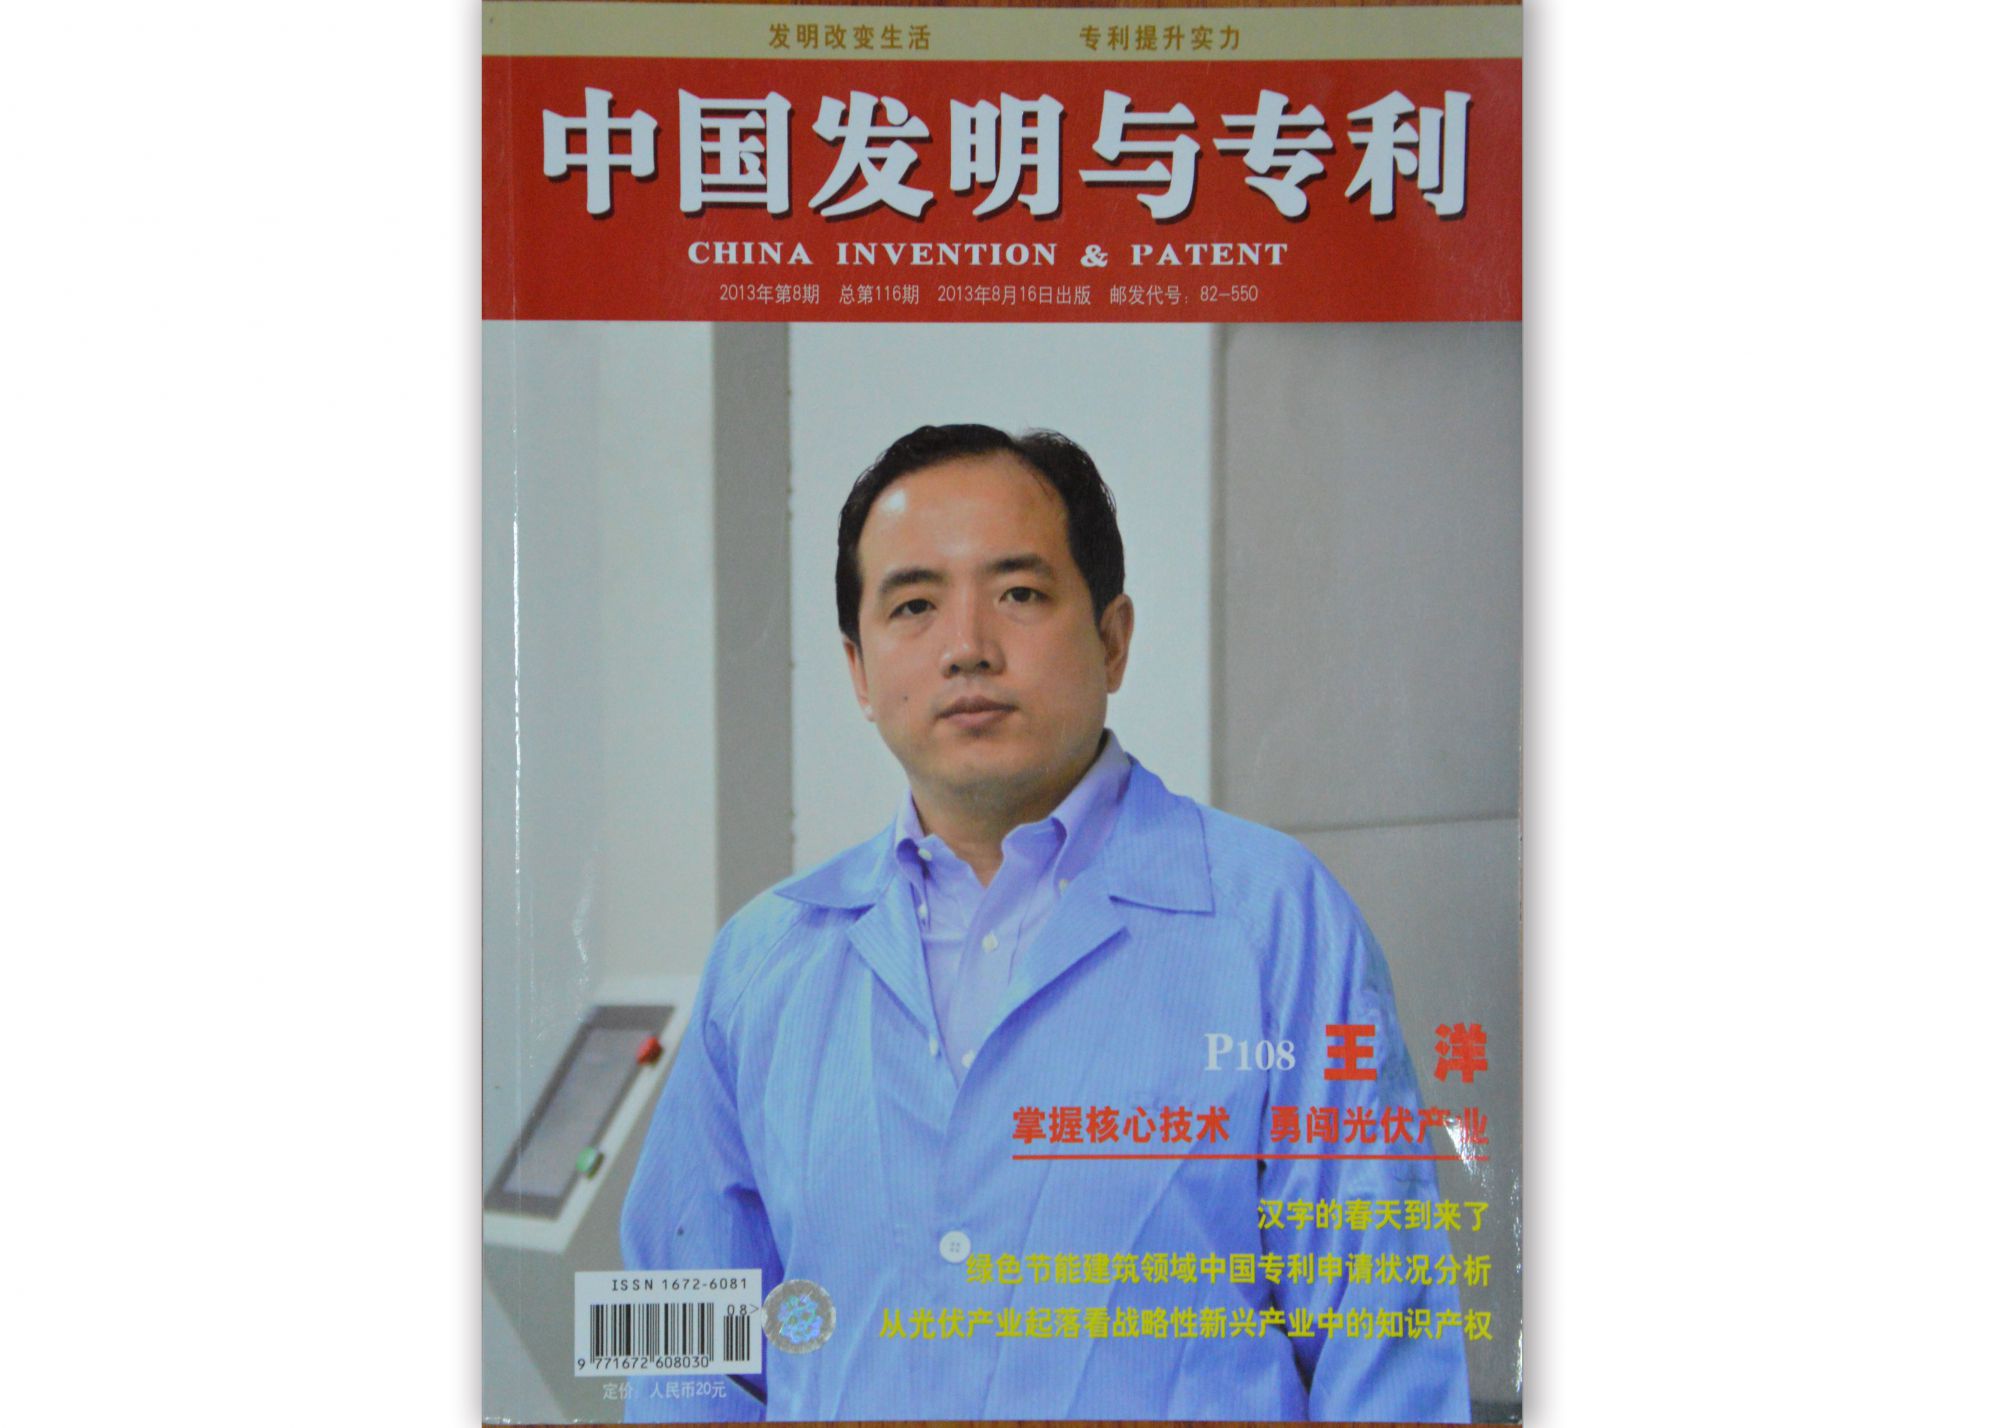 Dr. Wang Yang, founder of Yi Hui, won the &quot;scientific Chinese (2013) person of the year - Outstanding Young Scientist Award&quot;.